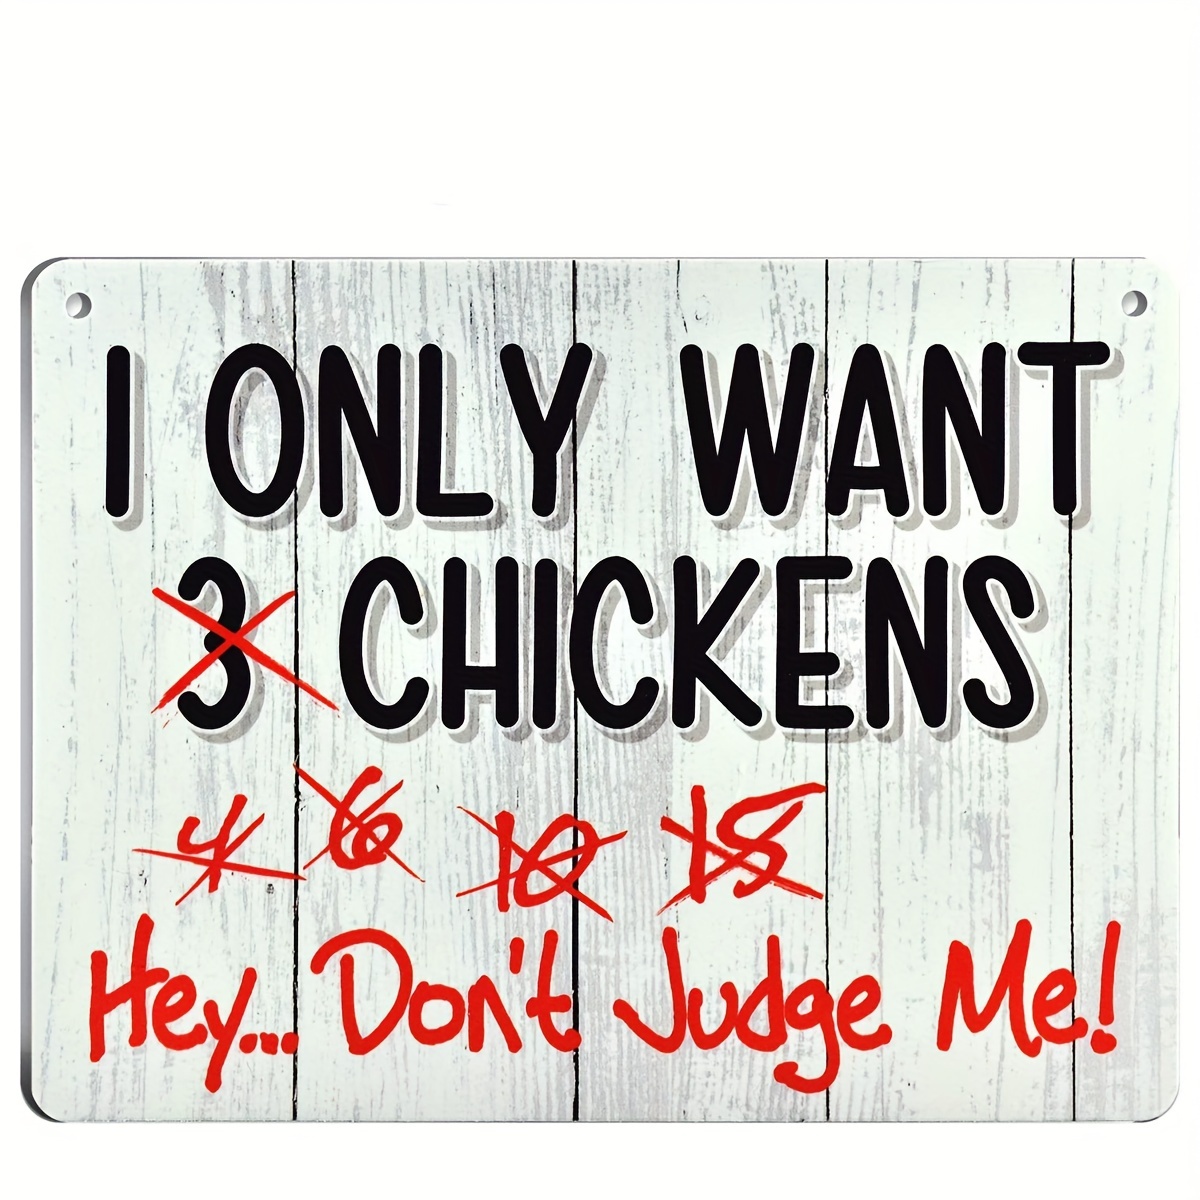 

Rustic Farmhouse Metal Chicken Coop Sign - 'i Only Want 3 Chickens' With Red Disclaimer - Durable 12x8 Inch Wall Mount Decor For Poultry Lovers, No Electricity Required, Feather-free